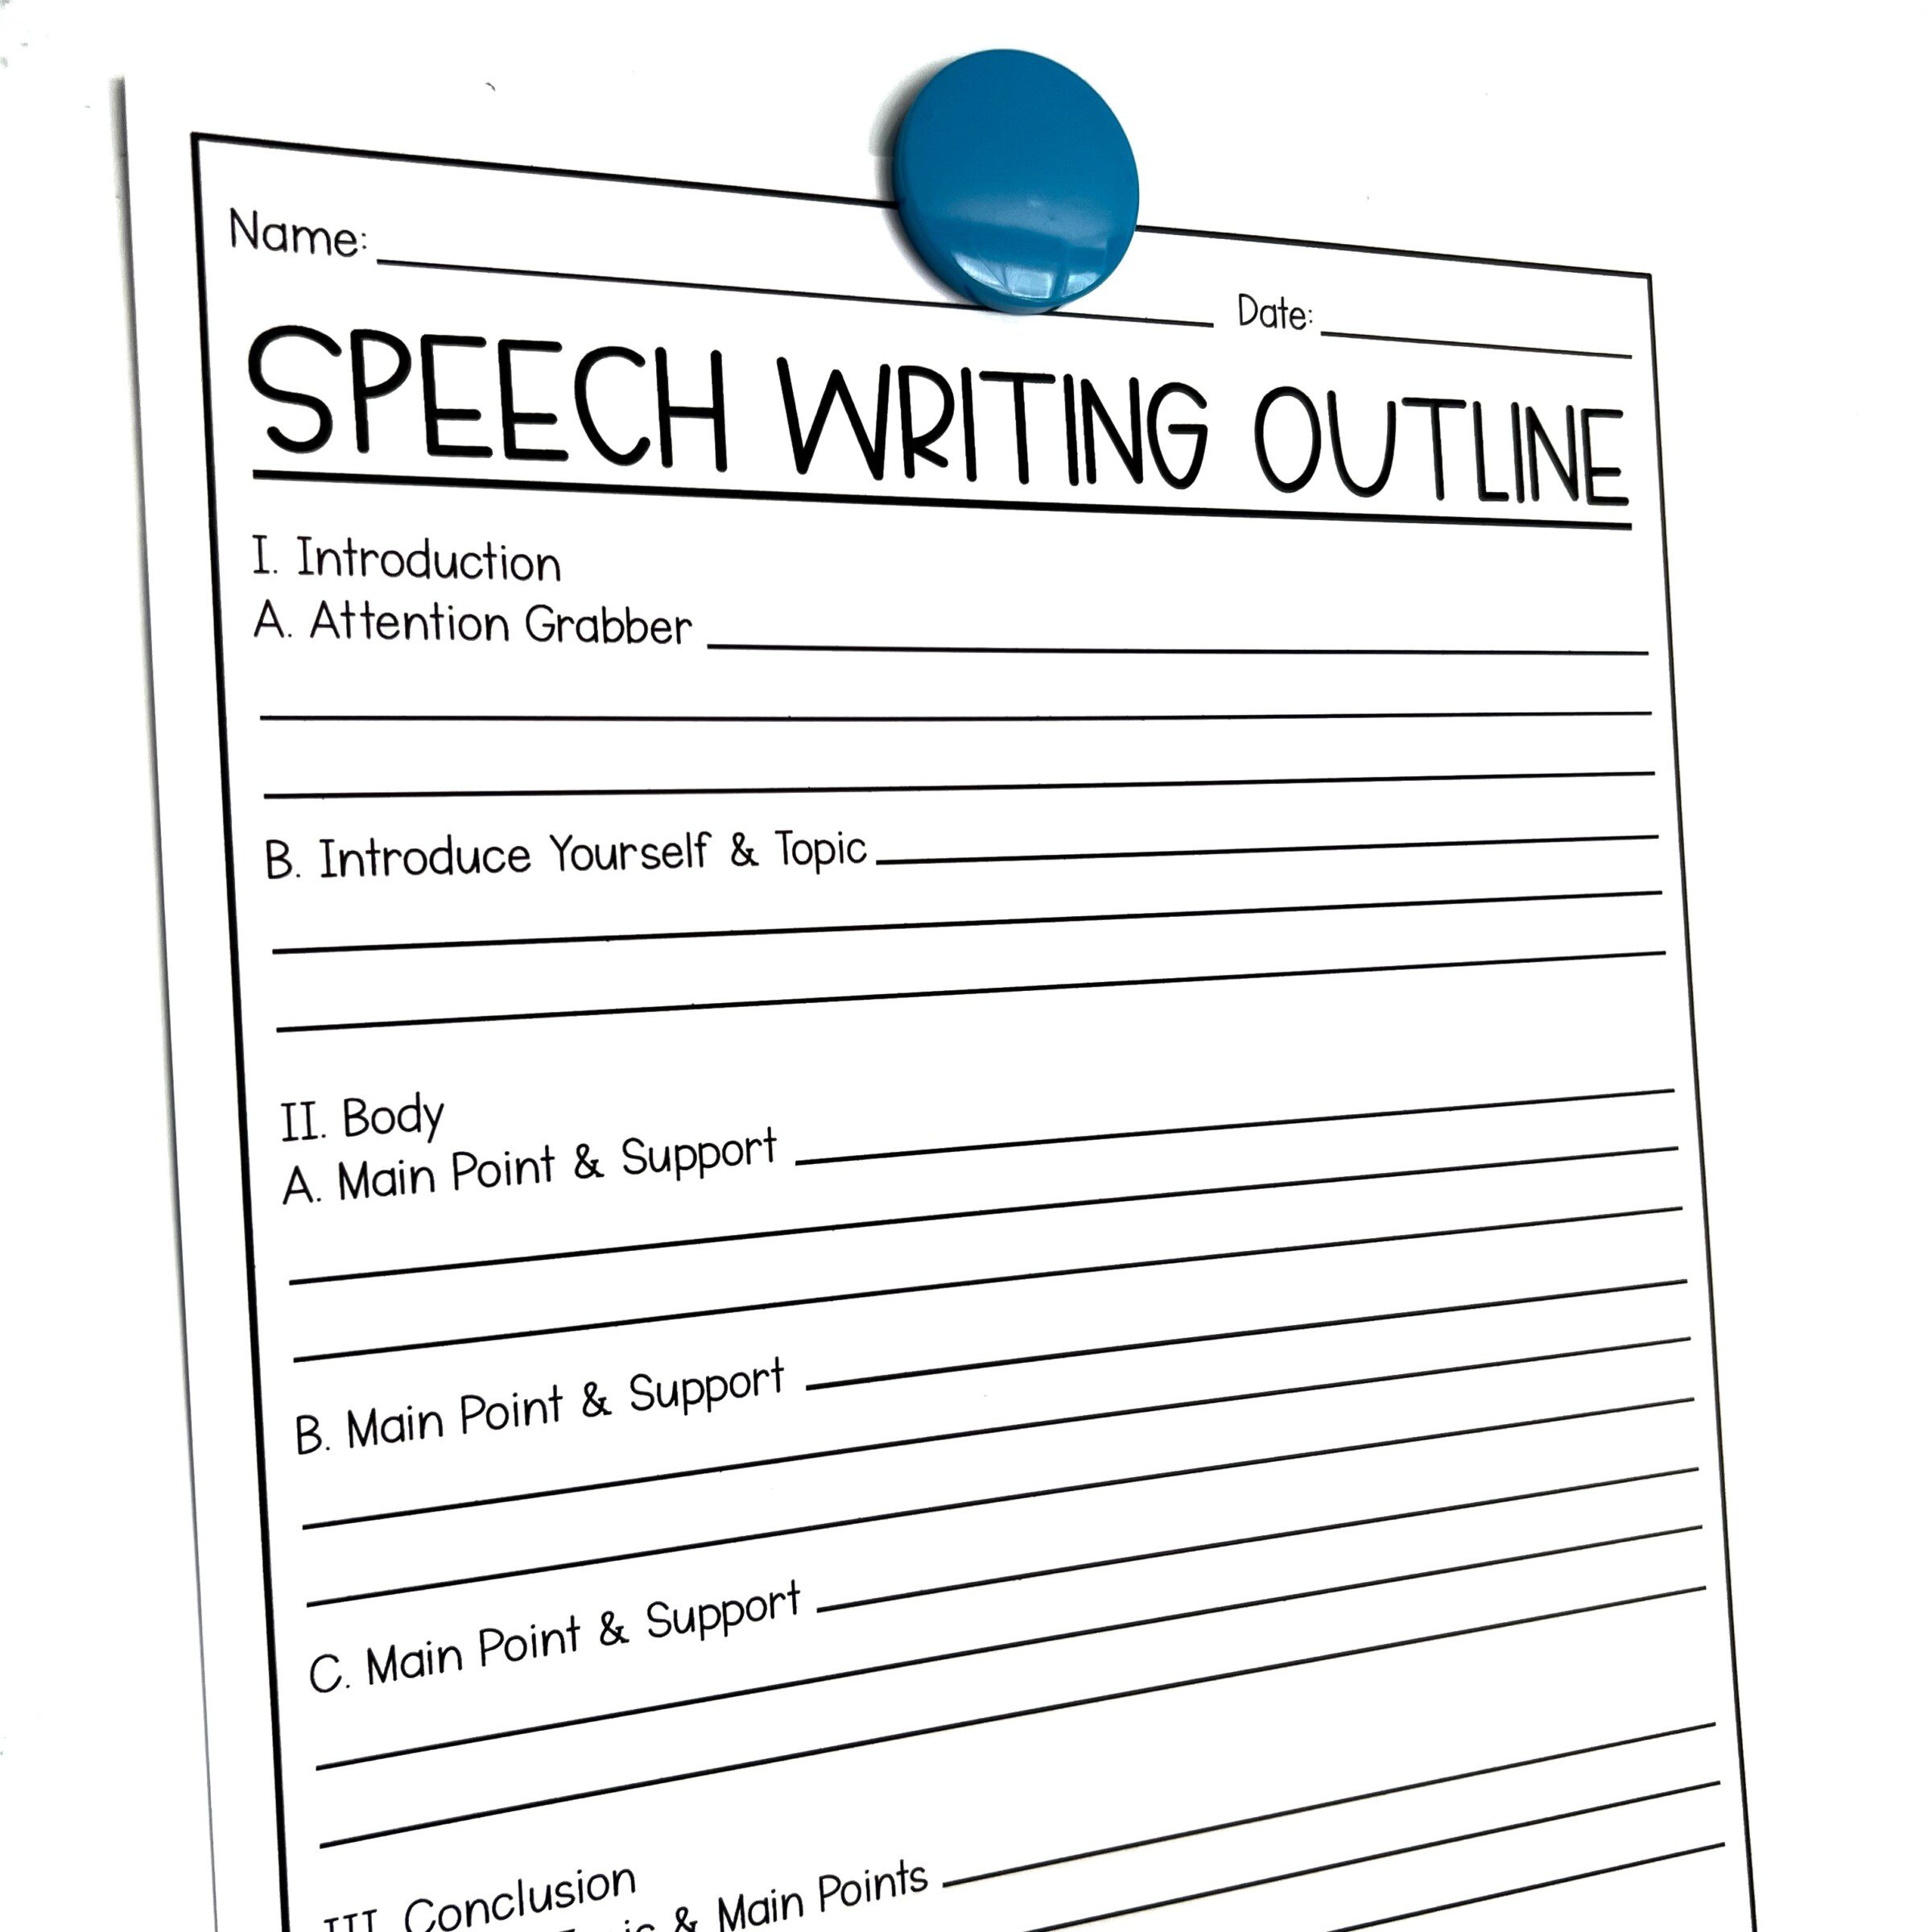 speech writing outline brainly